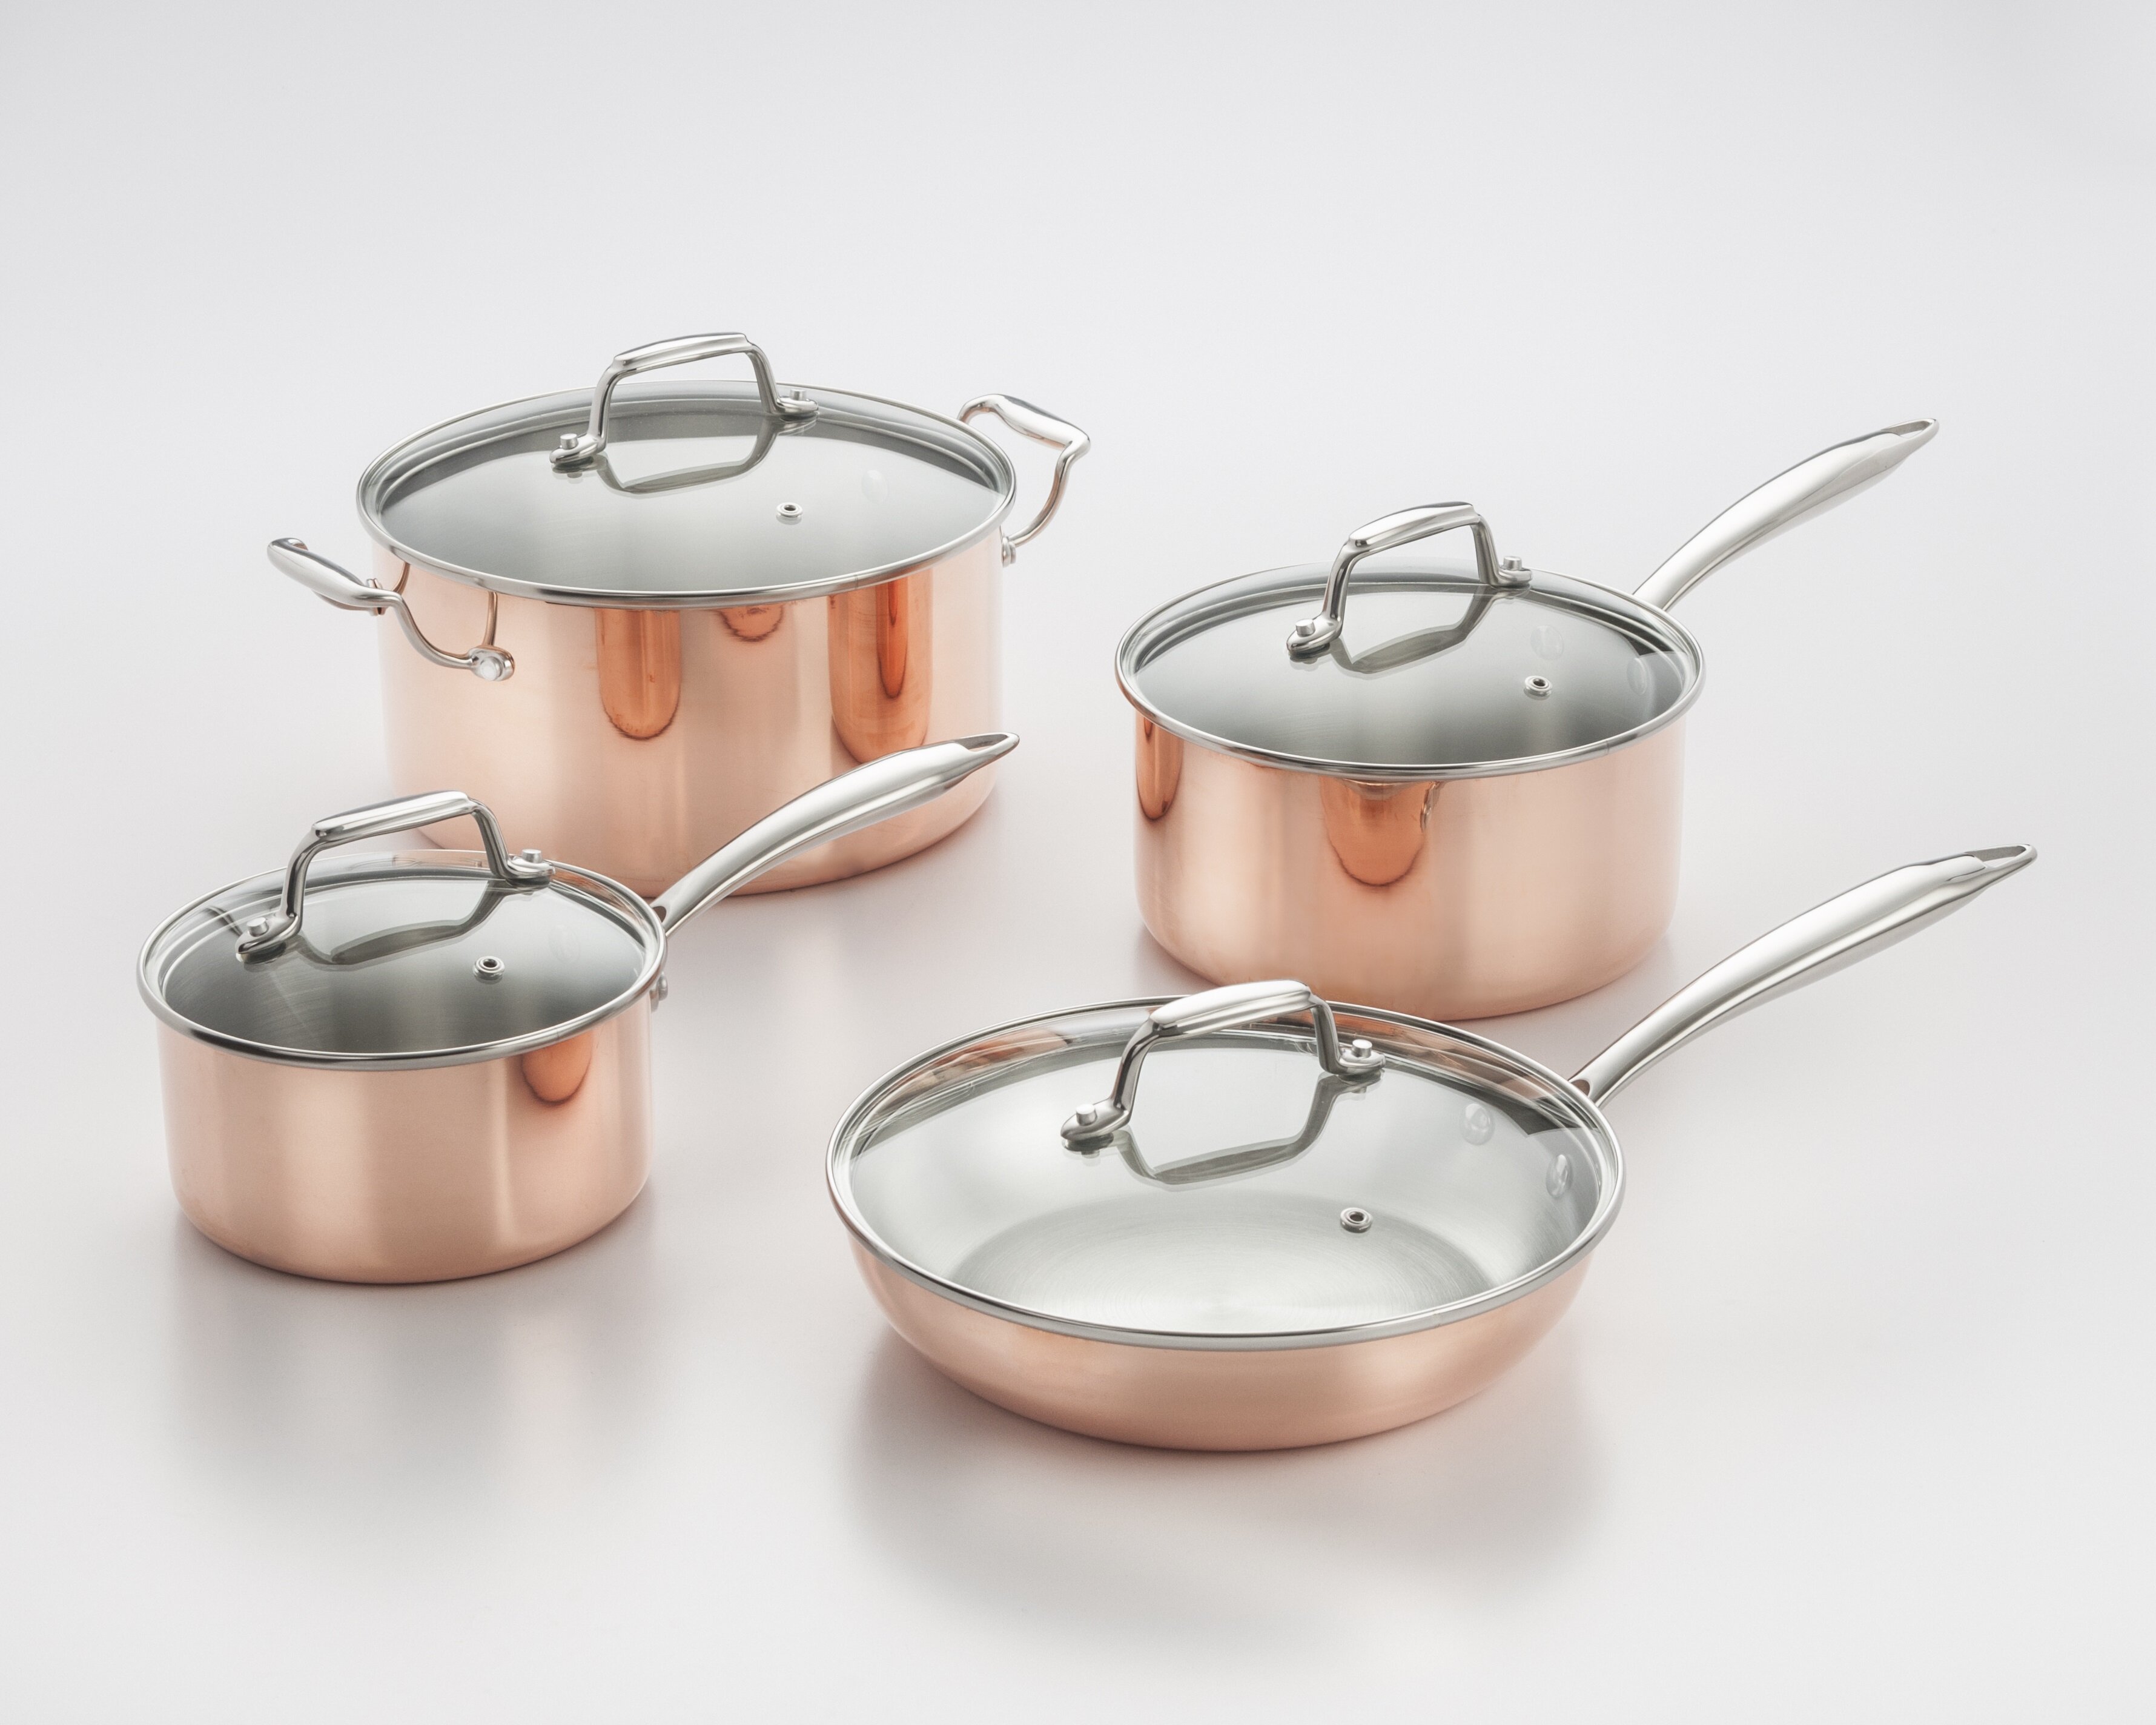 Details about   15PCS Classic Stainless Steel Cookware Set Pots and Pans with Lids Cooking Tools 